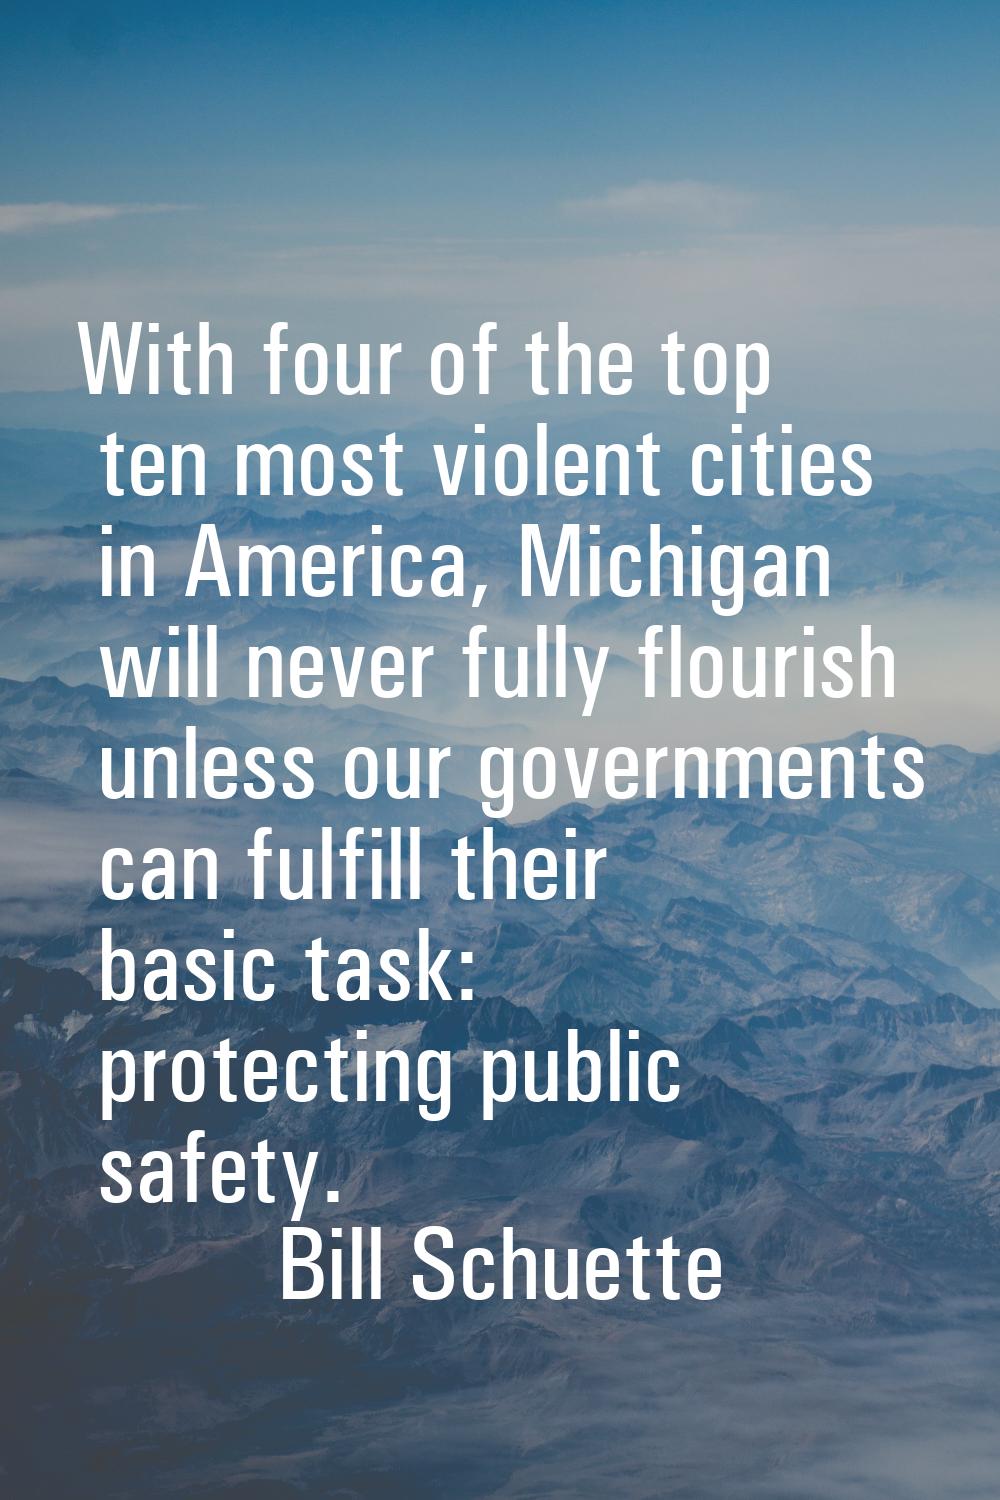 With four of the top ten most violent cities in America, Michigan will never fully flourish unless 